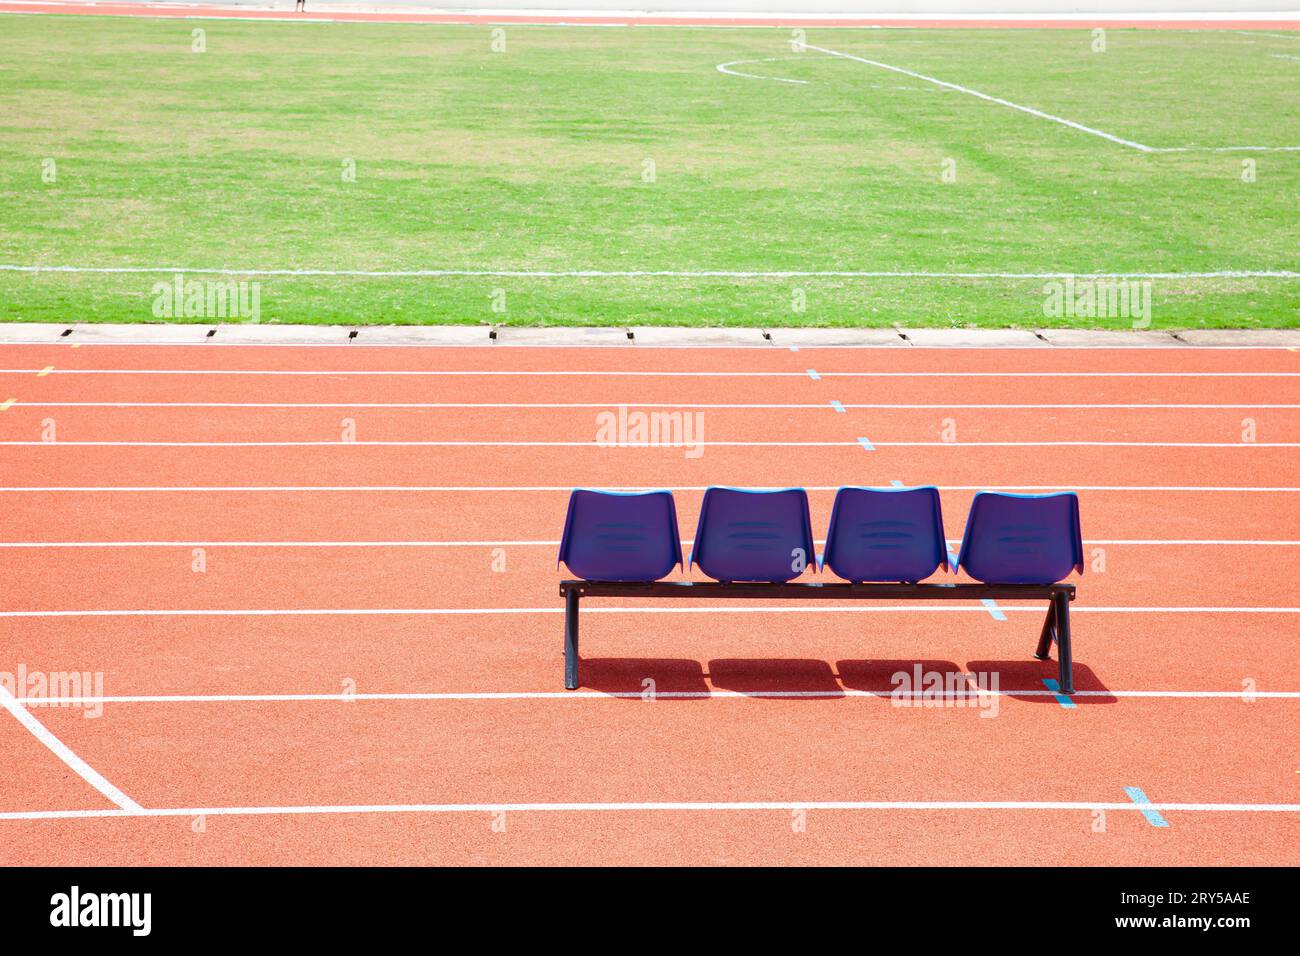 Blue reserve chair bench for staff, coach, substitutes players bench in outdoors sport stadium Stock Photo